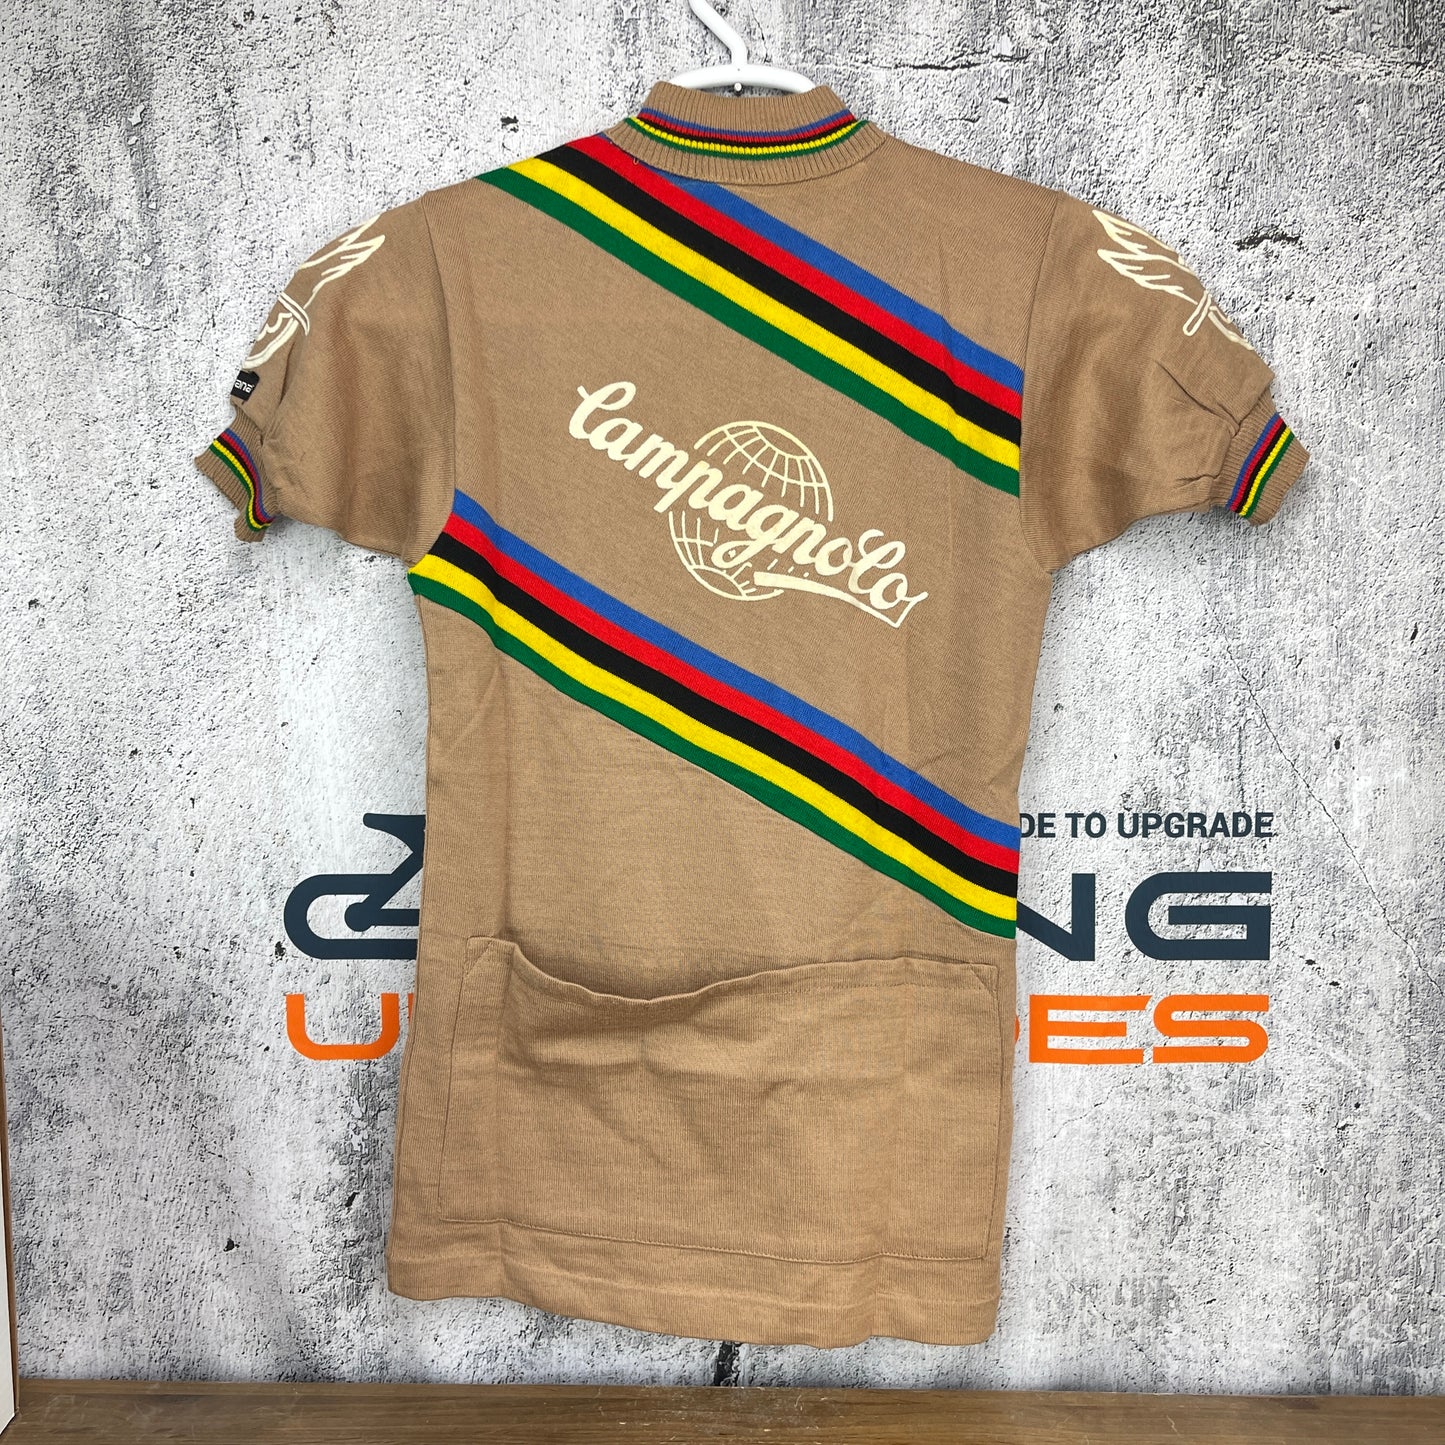 Vintage Campagnolo World Champion Stripes Wool Cycling Jersey by Giordana